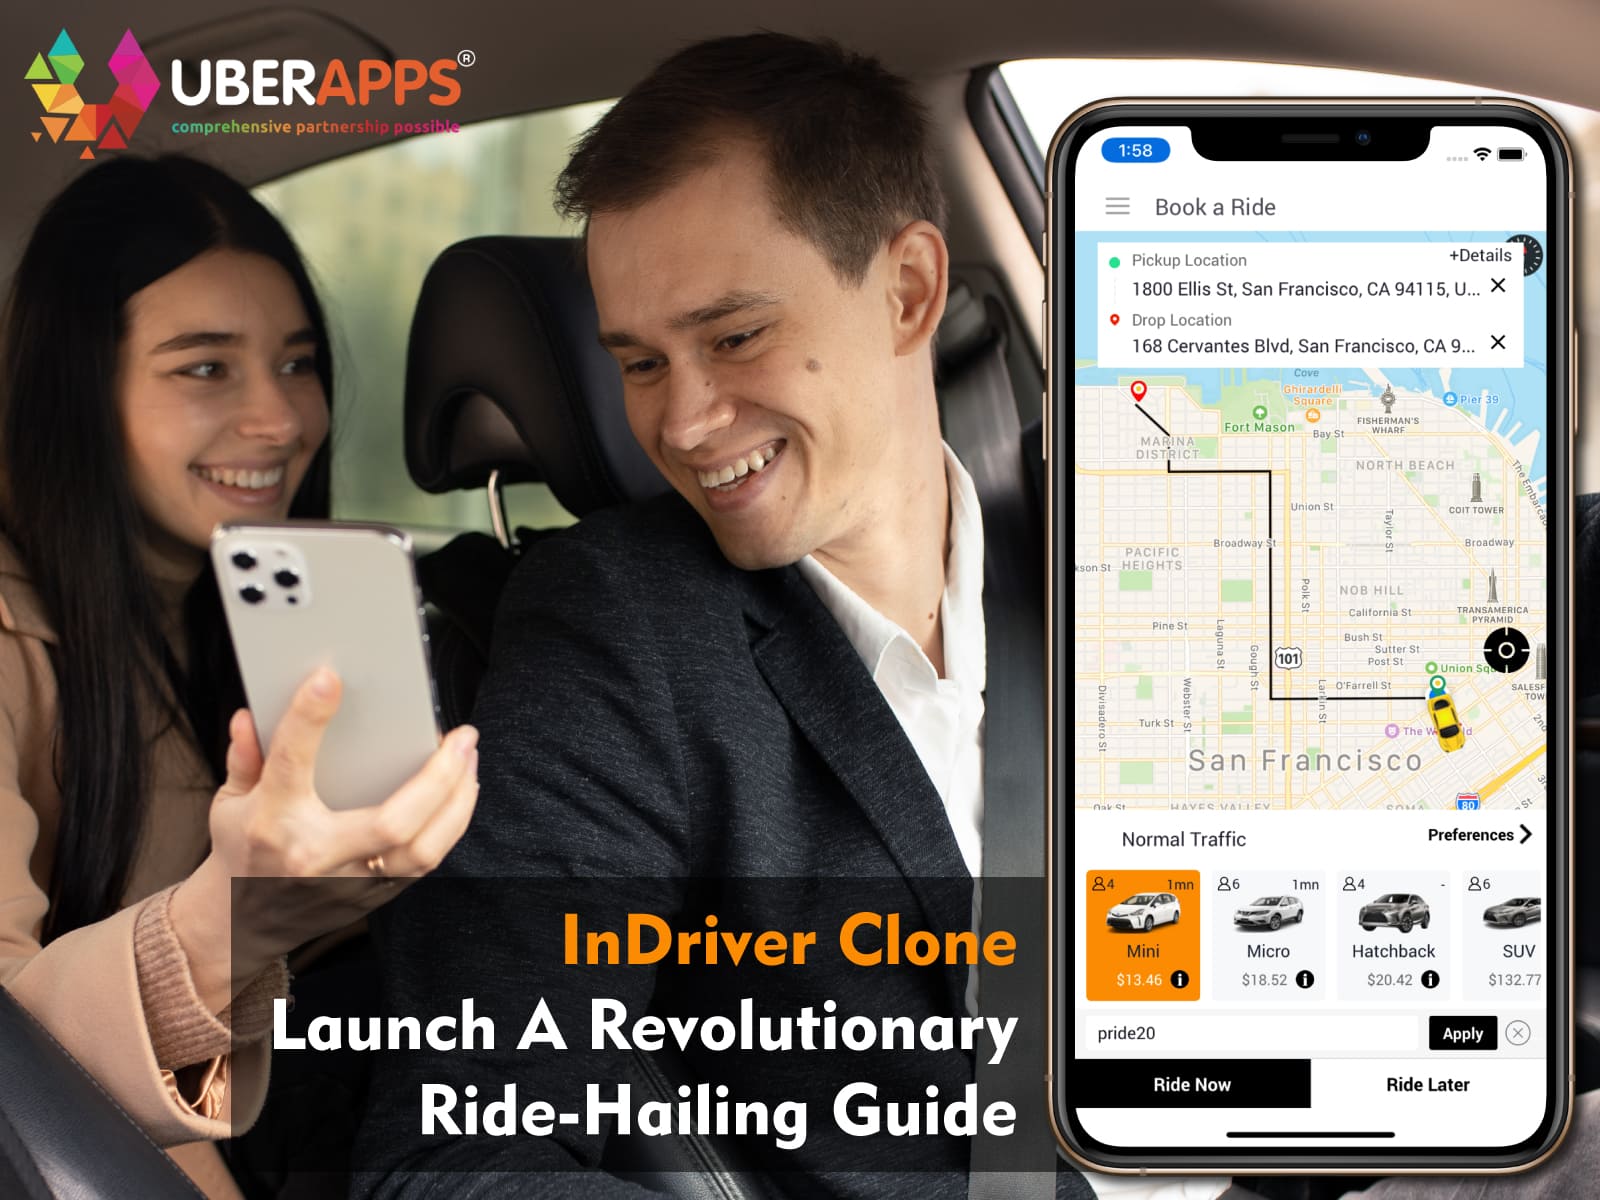 InDriver Clone Launch: A Revolutionary Ride-Hailing Guide